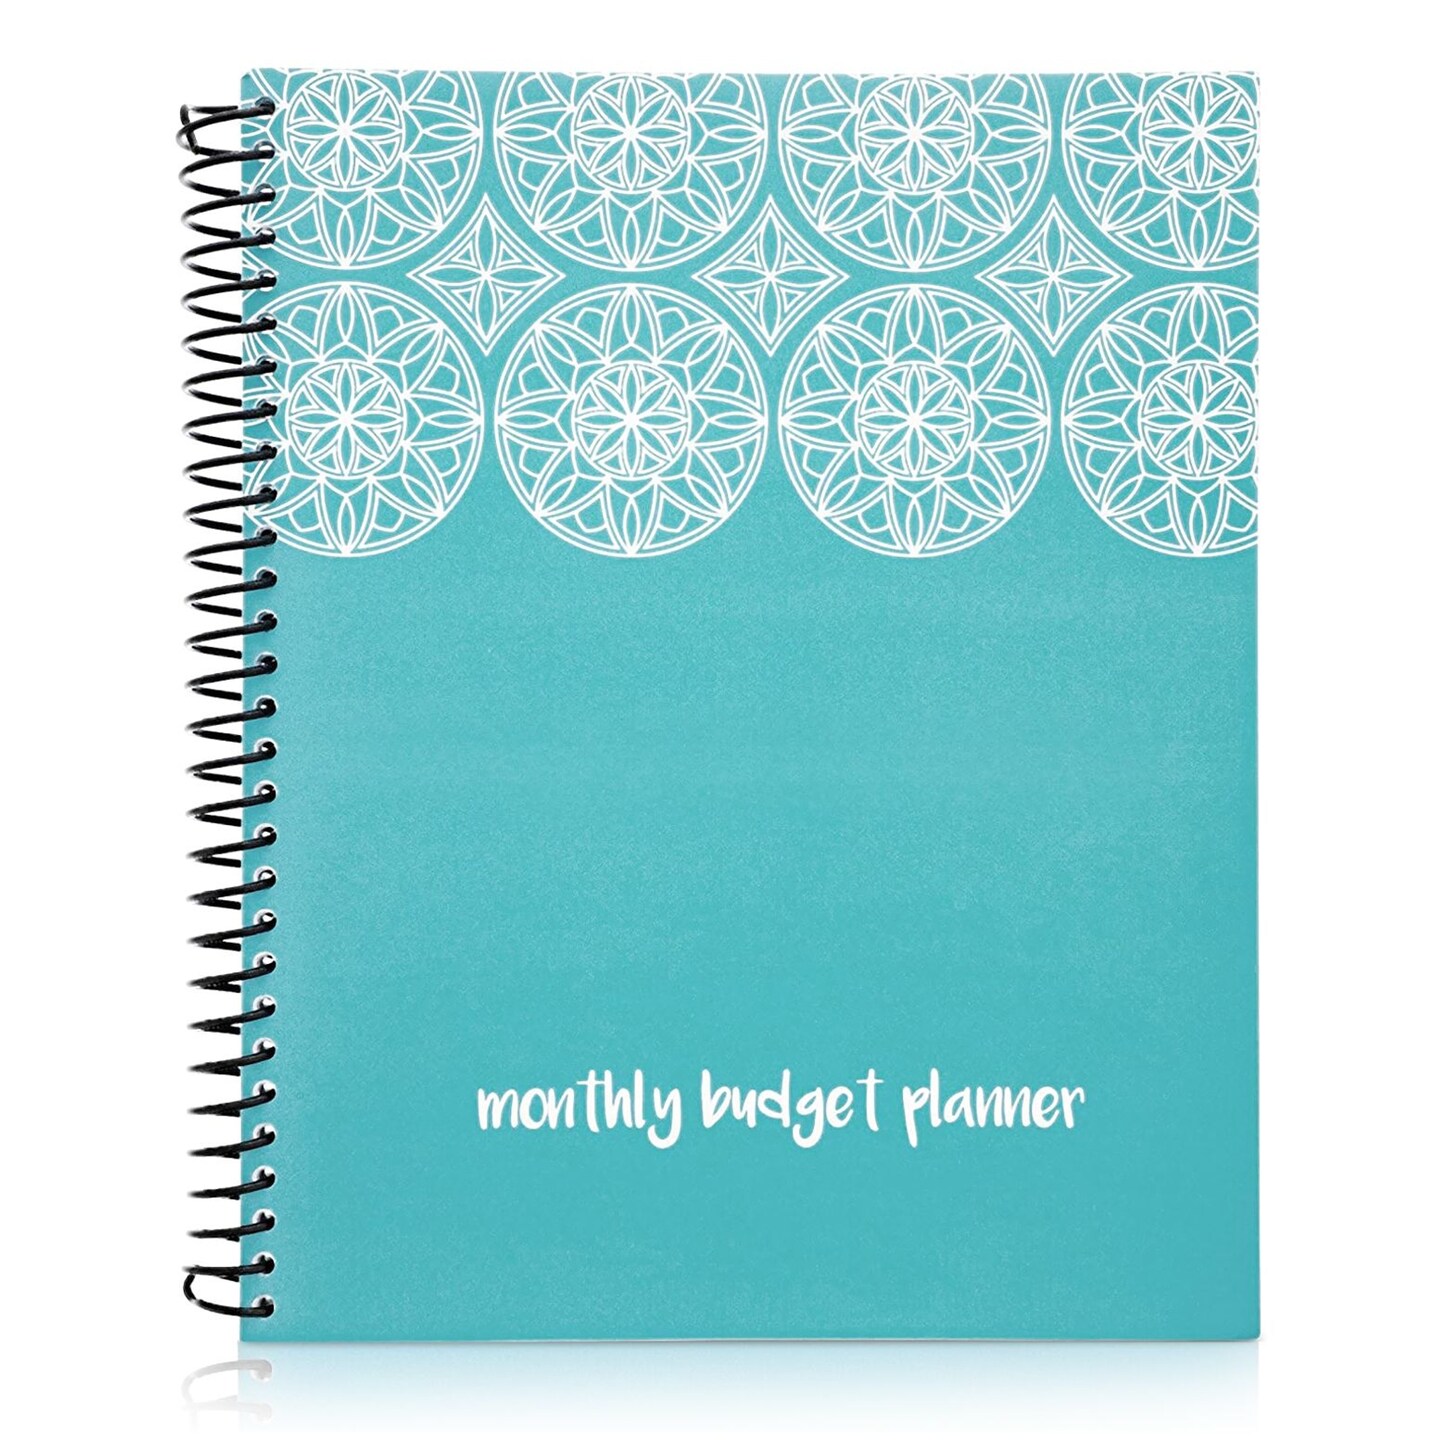 Blue Monthly Budget Planner with Pockets for Receipts, Bill Organizer, Home Expense Tracker (8x10 In)